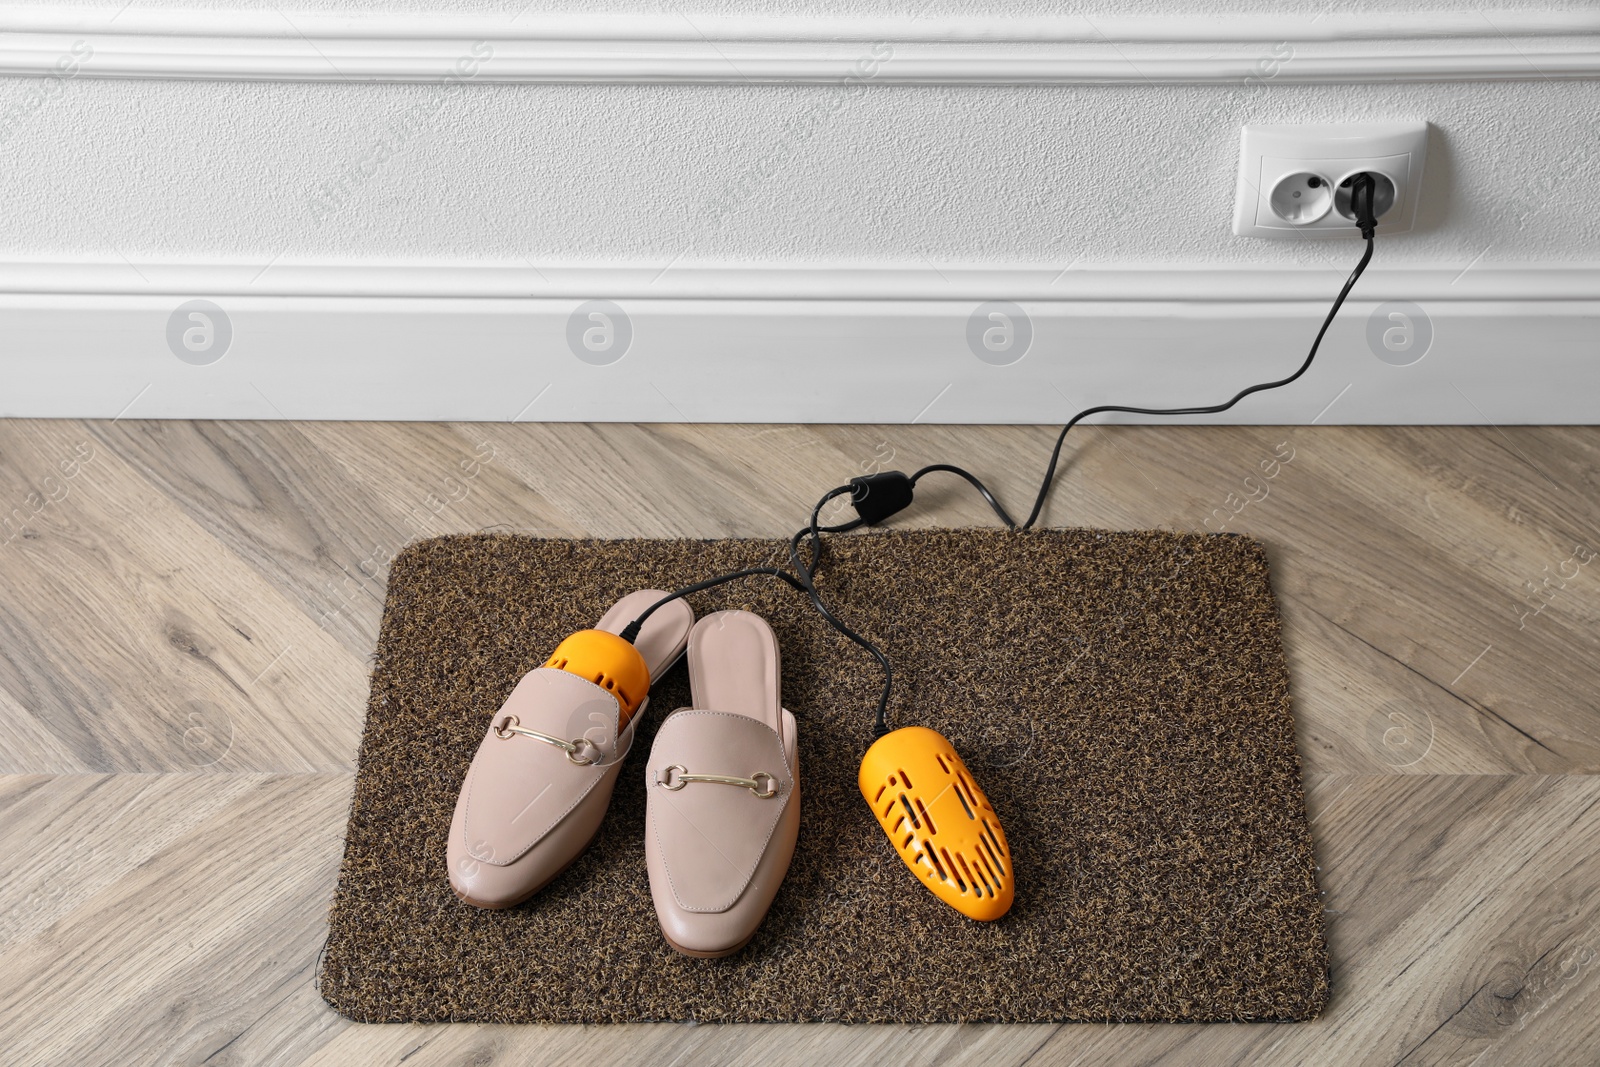 Photo of Pair of stylish shoes with modern electric footwear dryer on door mat indoors